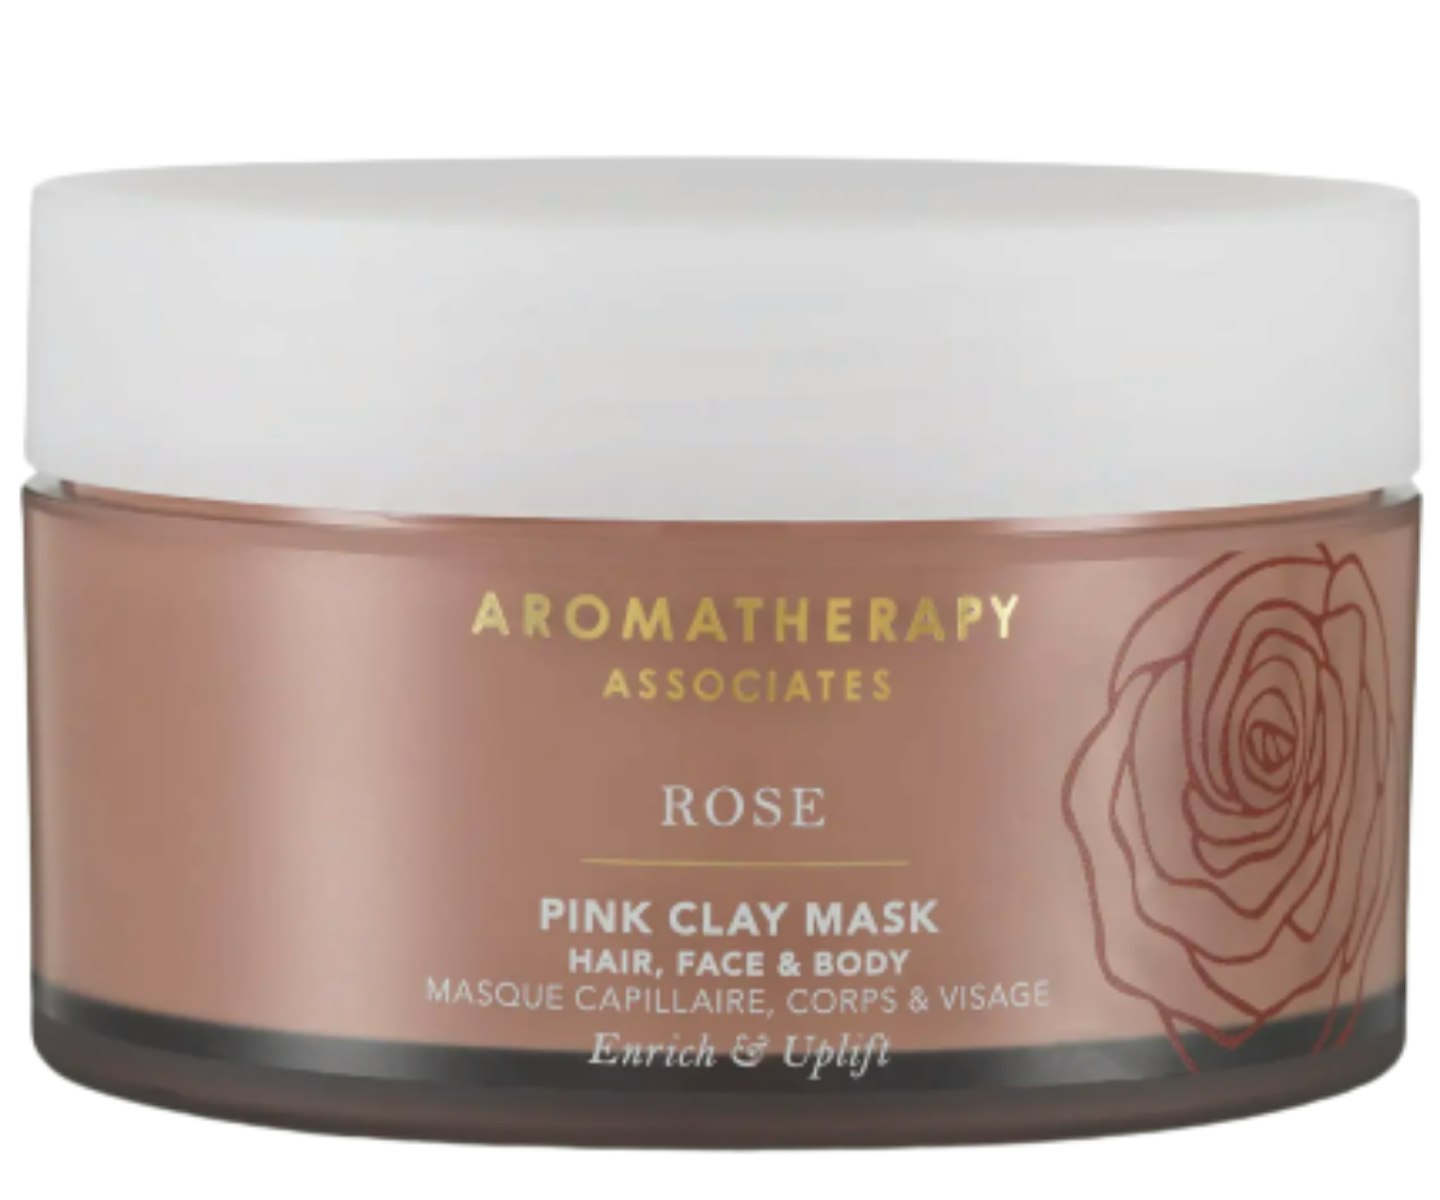 A picture of the Aromatherapy Associates Rose Pink Clay Mask